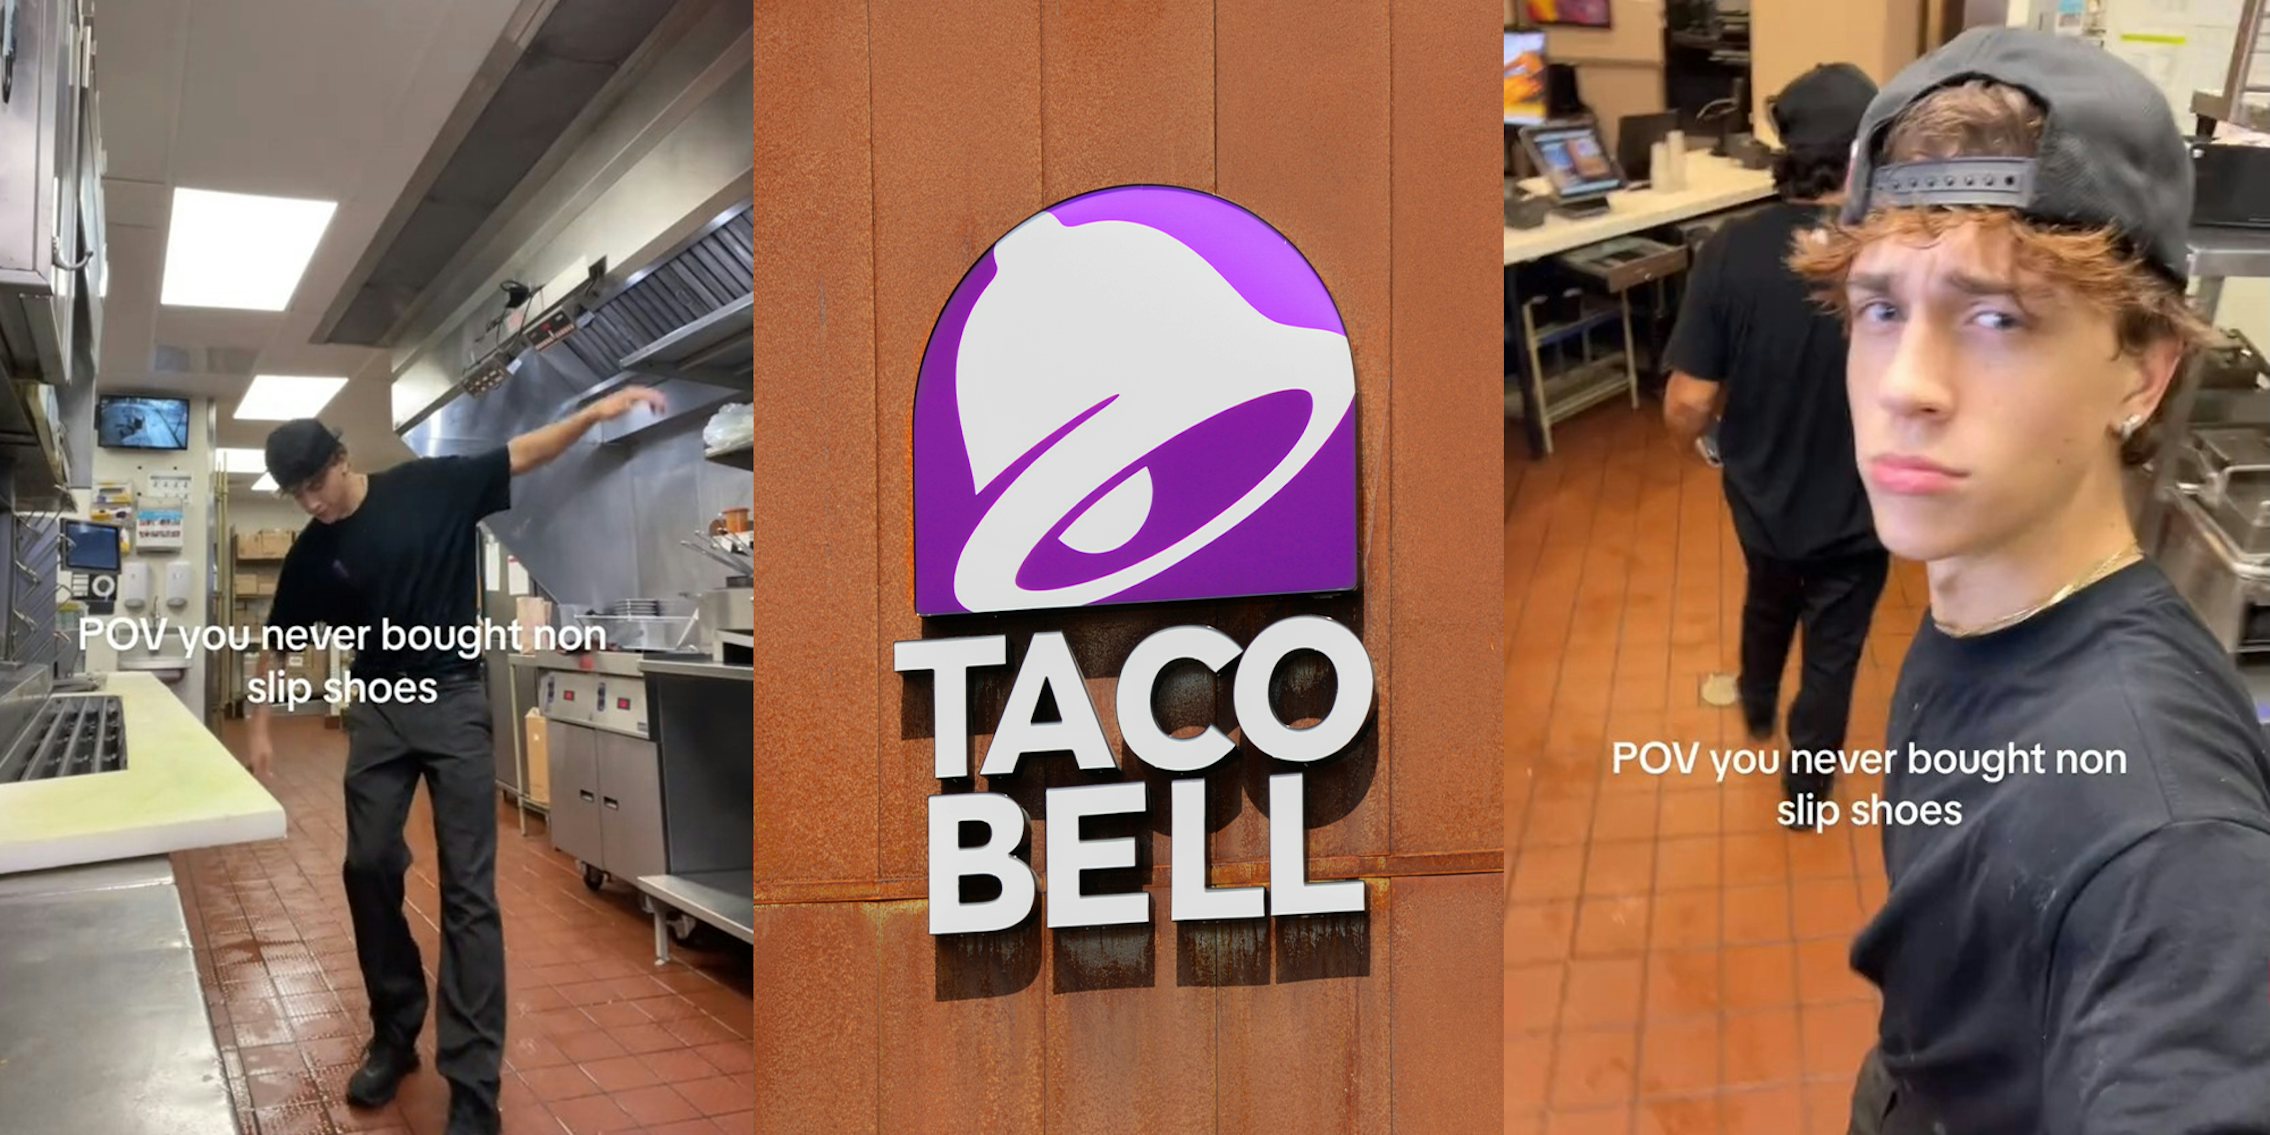 Taco Bell worker slips around store because he doesn't have non-slip shoes